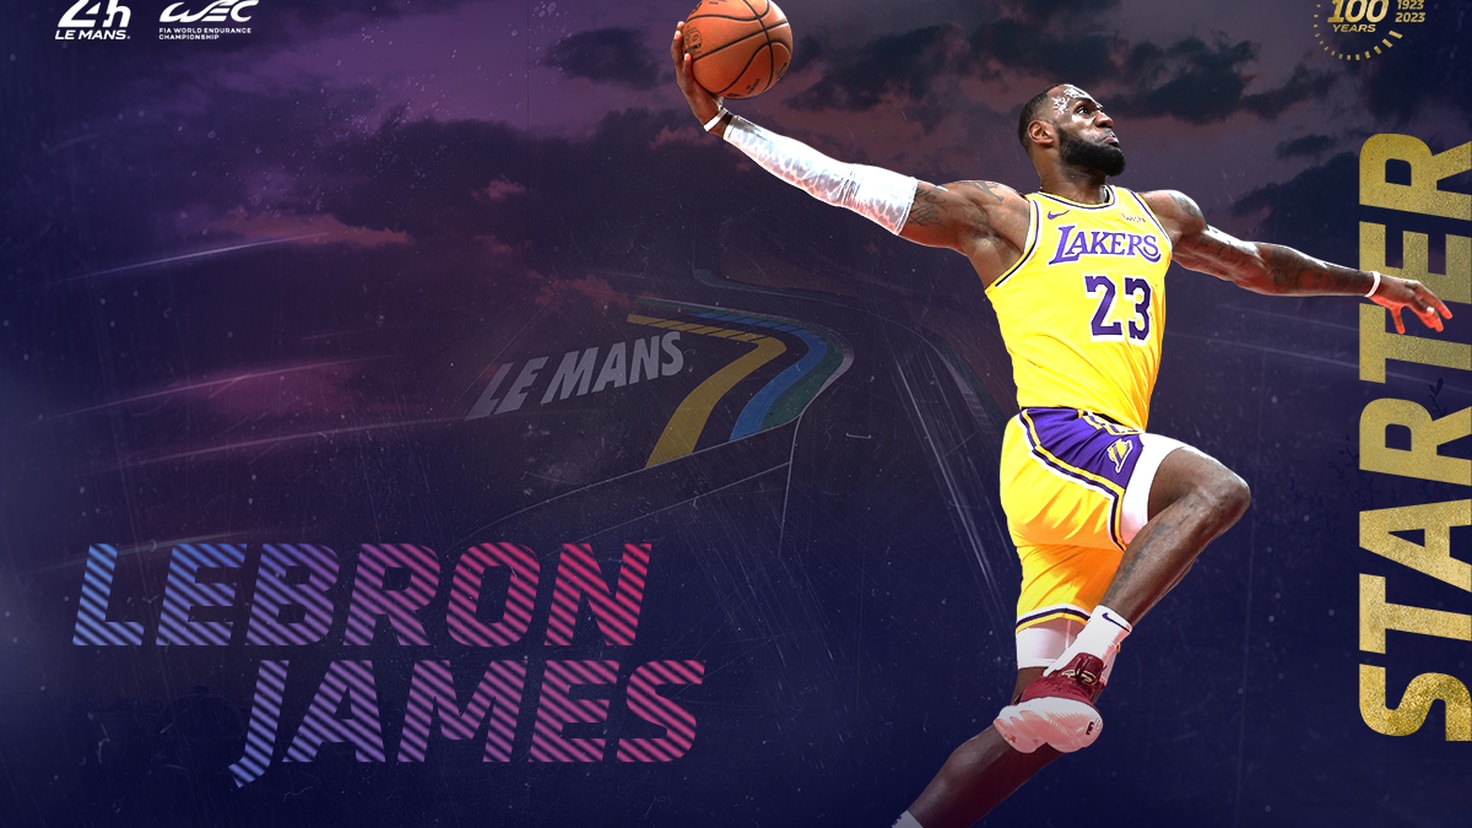 LeBron James will start the 24 Hours of Le Mans
